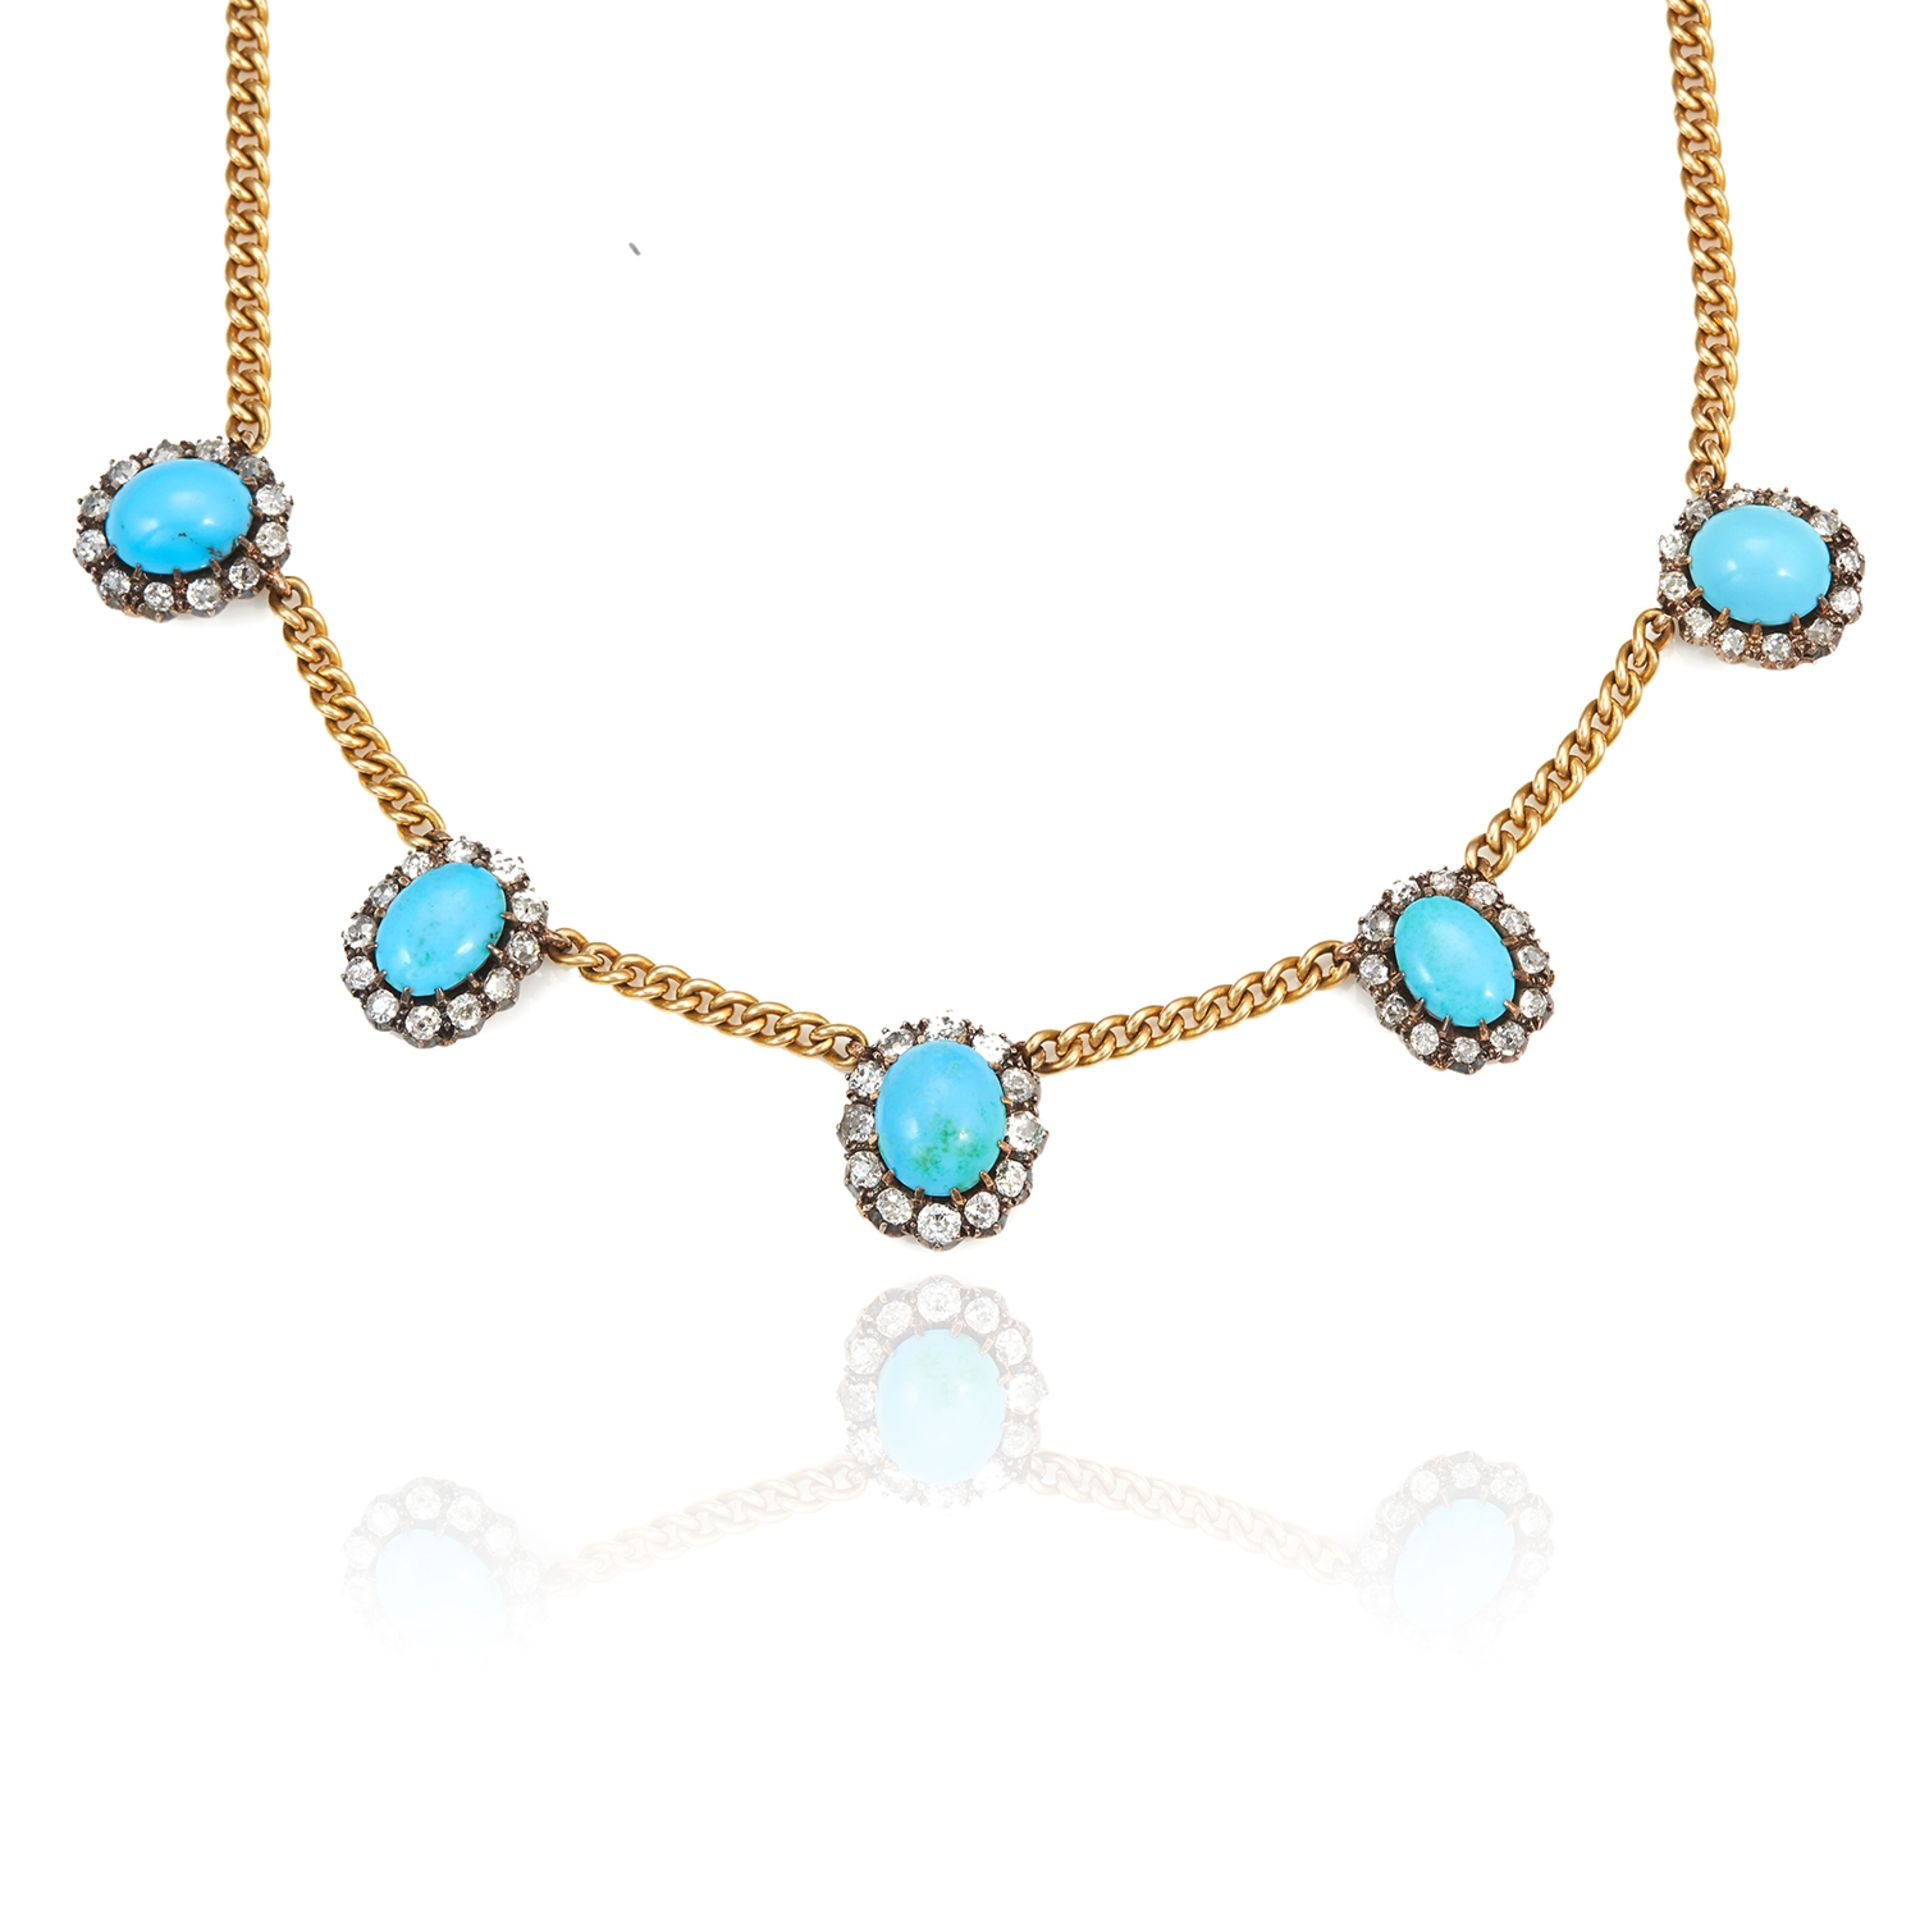 AN ANTIQUE TURQUOISE AND DIAMOND NECKLACE in 18ct yellow gold and silver, the curb link necklace